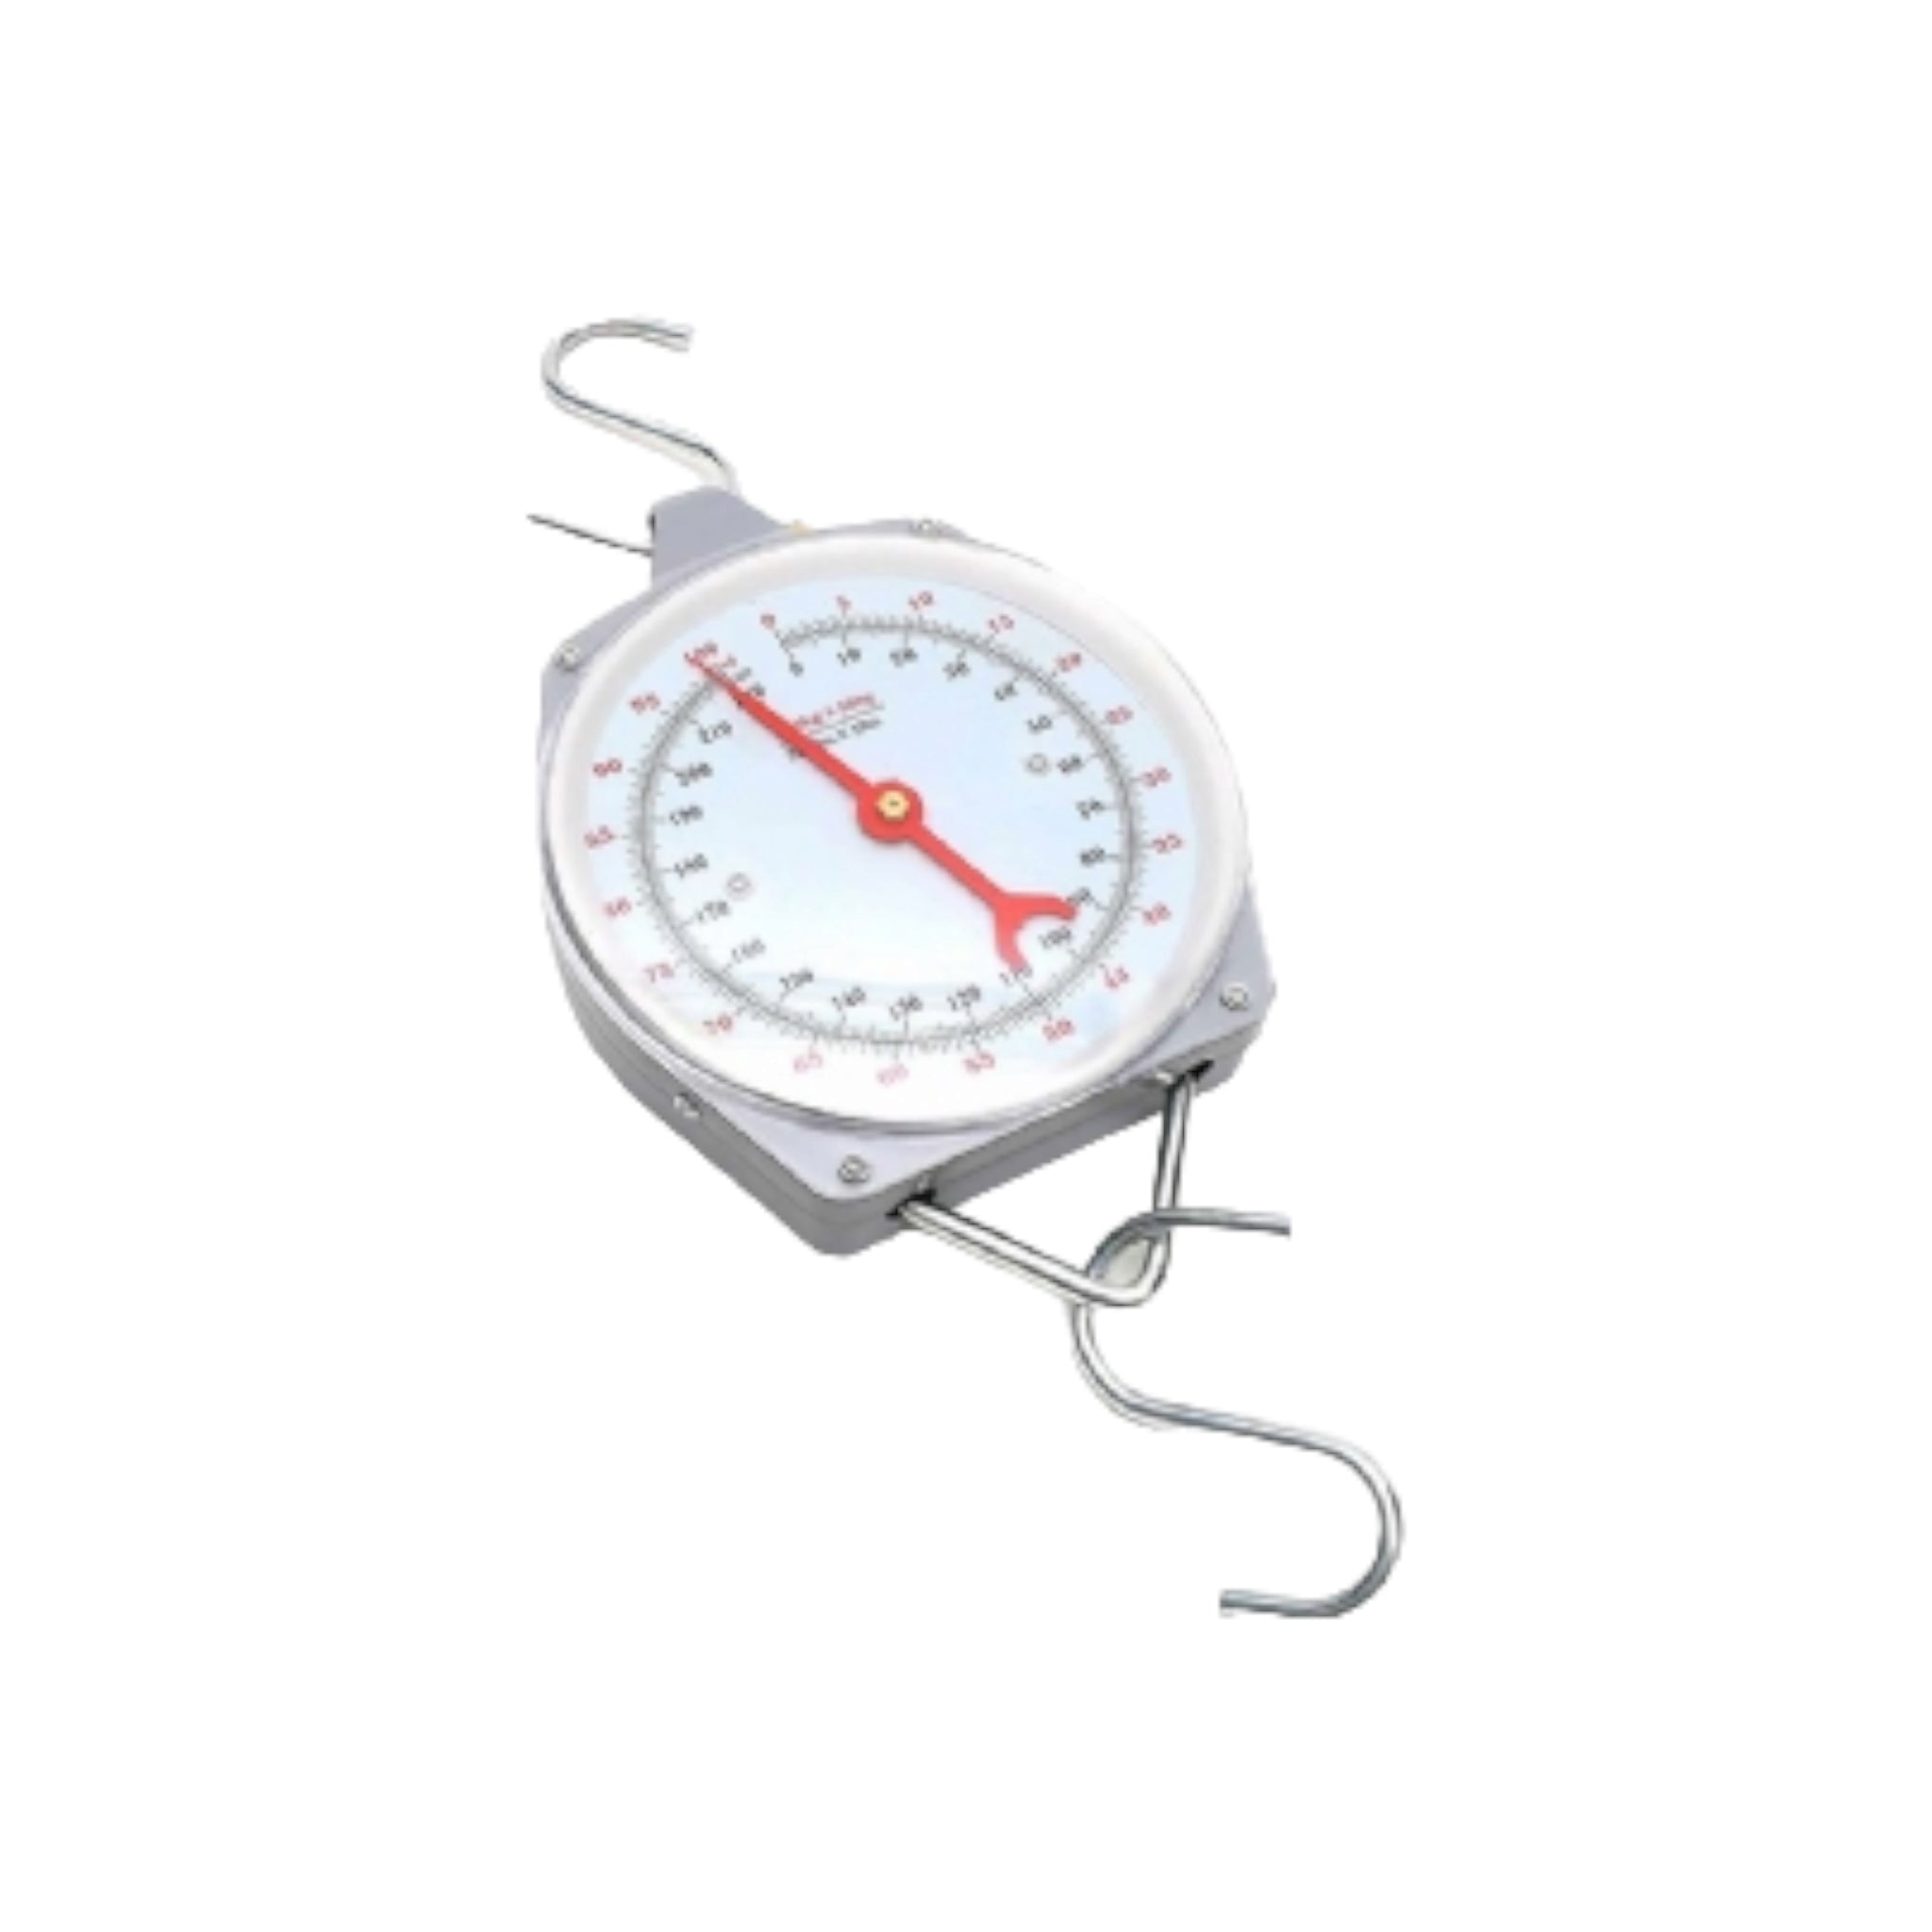 Brentwood Spring Dial Hoist Scale